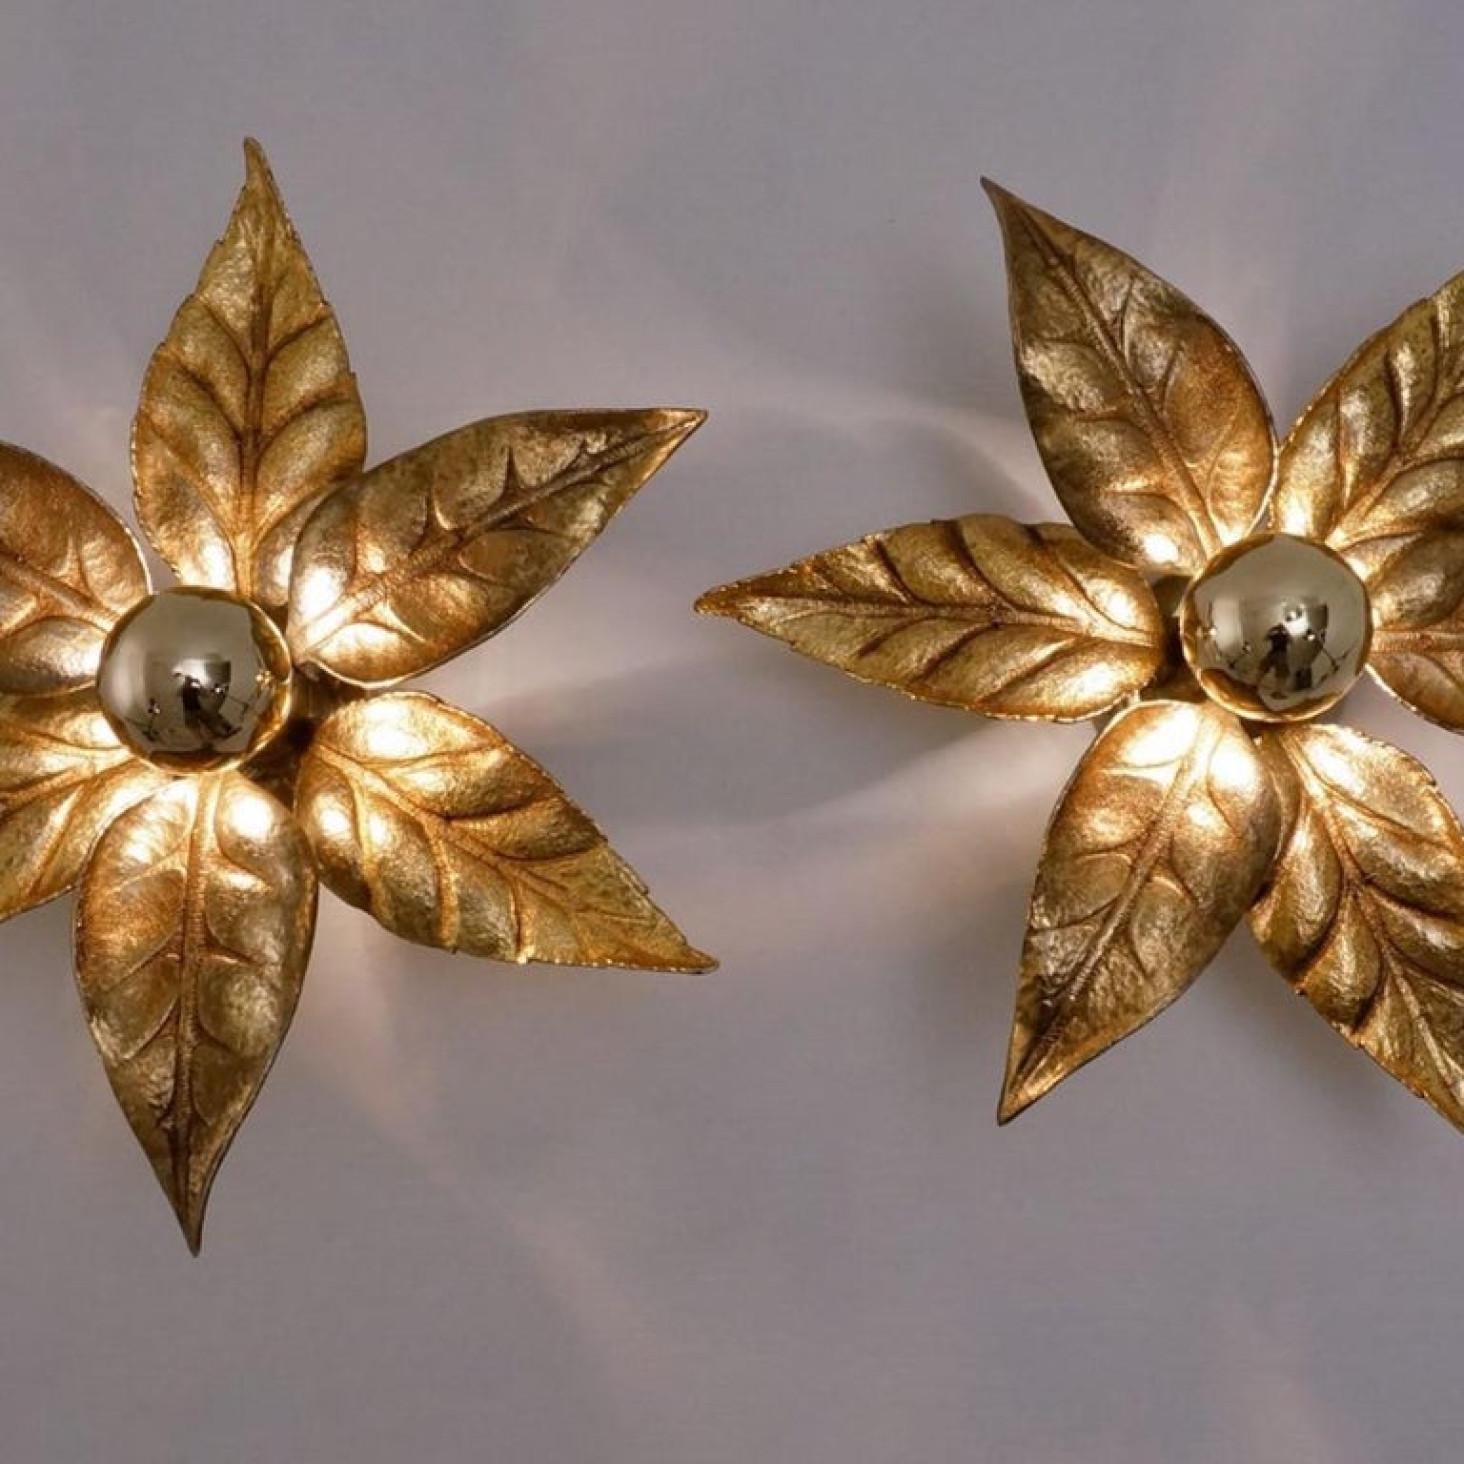 Brutalist Pair of Willy Daro Style Brass Flowers Wall Lights by Massive Lighting, 1970 For Sale